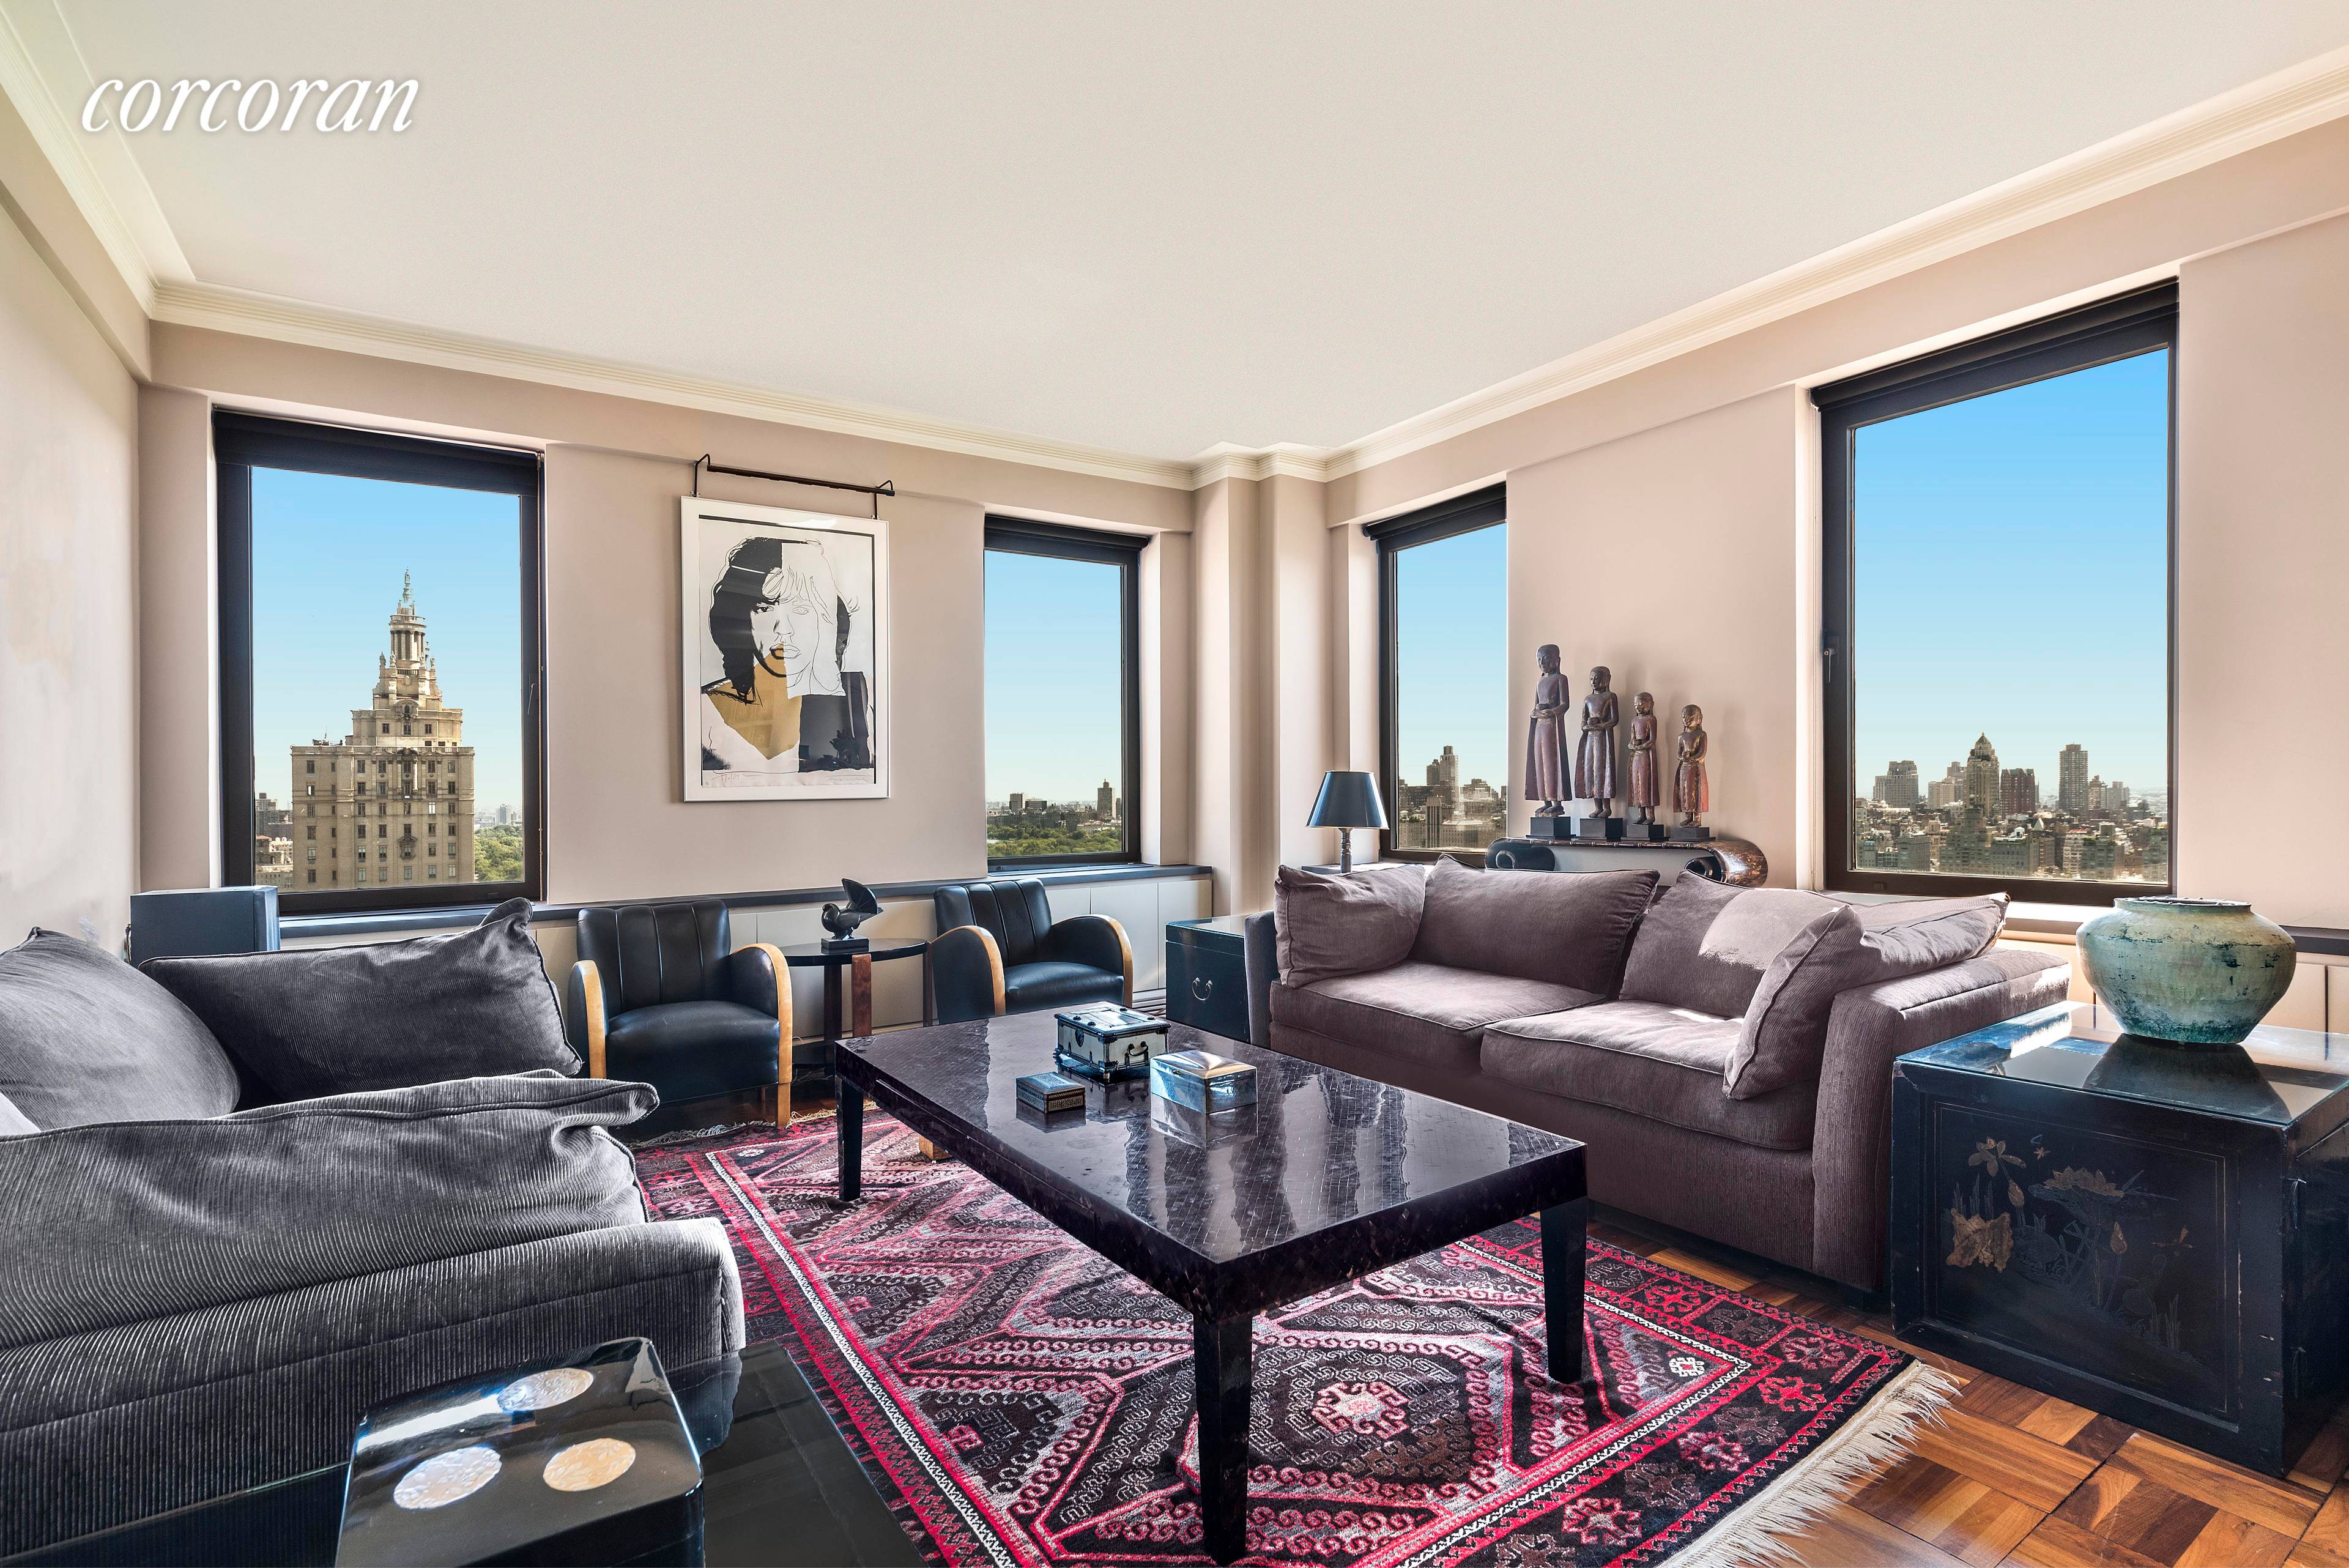 Seize this rare opportunity to rent a full floor tower residence at The Majestic on Central Park West and 72nd Street.